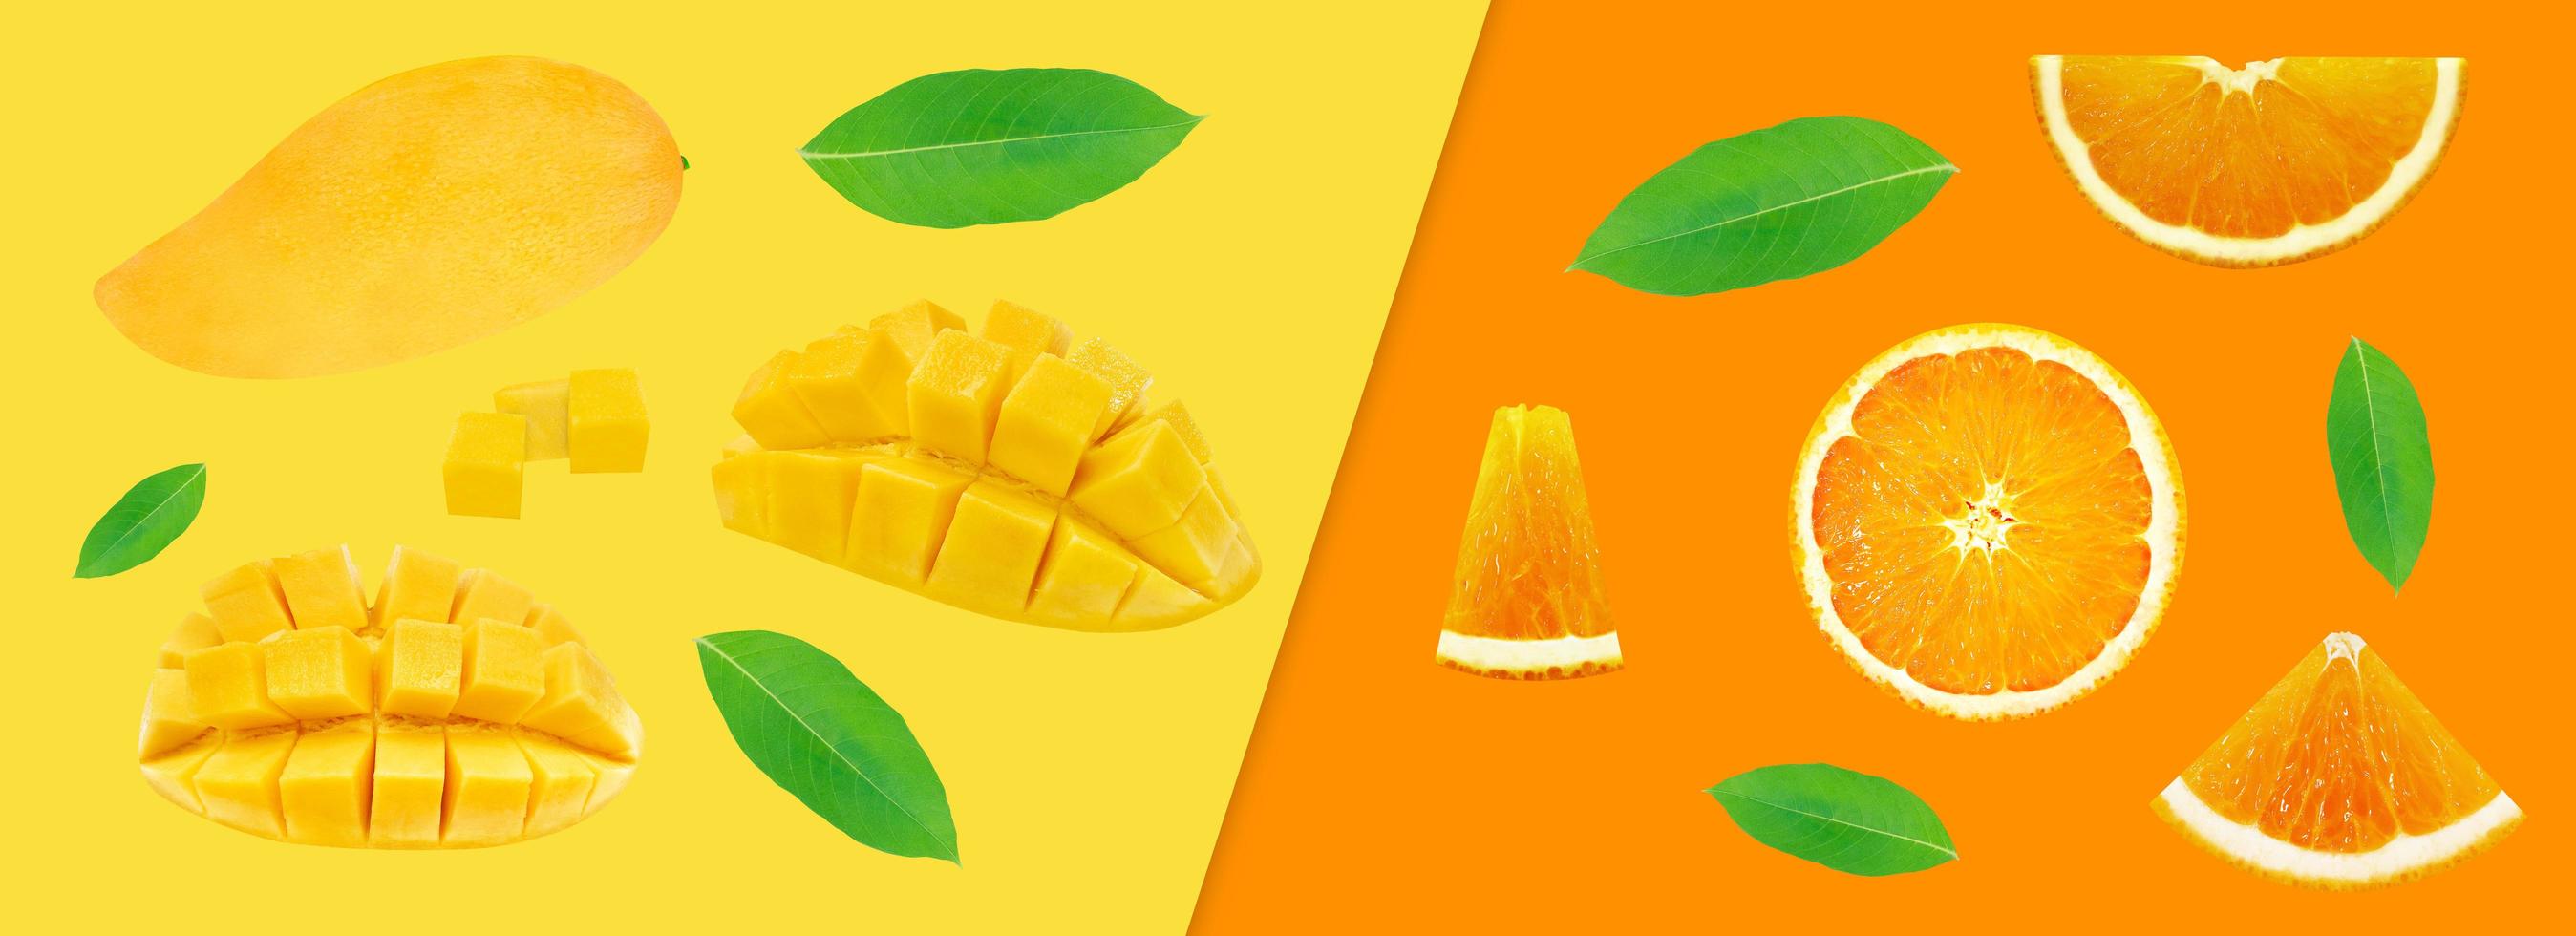 Fruit collections orange and mango on yellow background,Summer fruits concept,with clipping path. photo